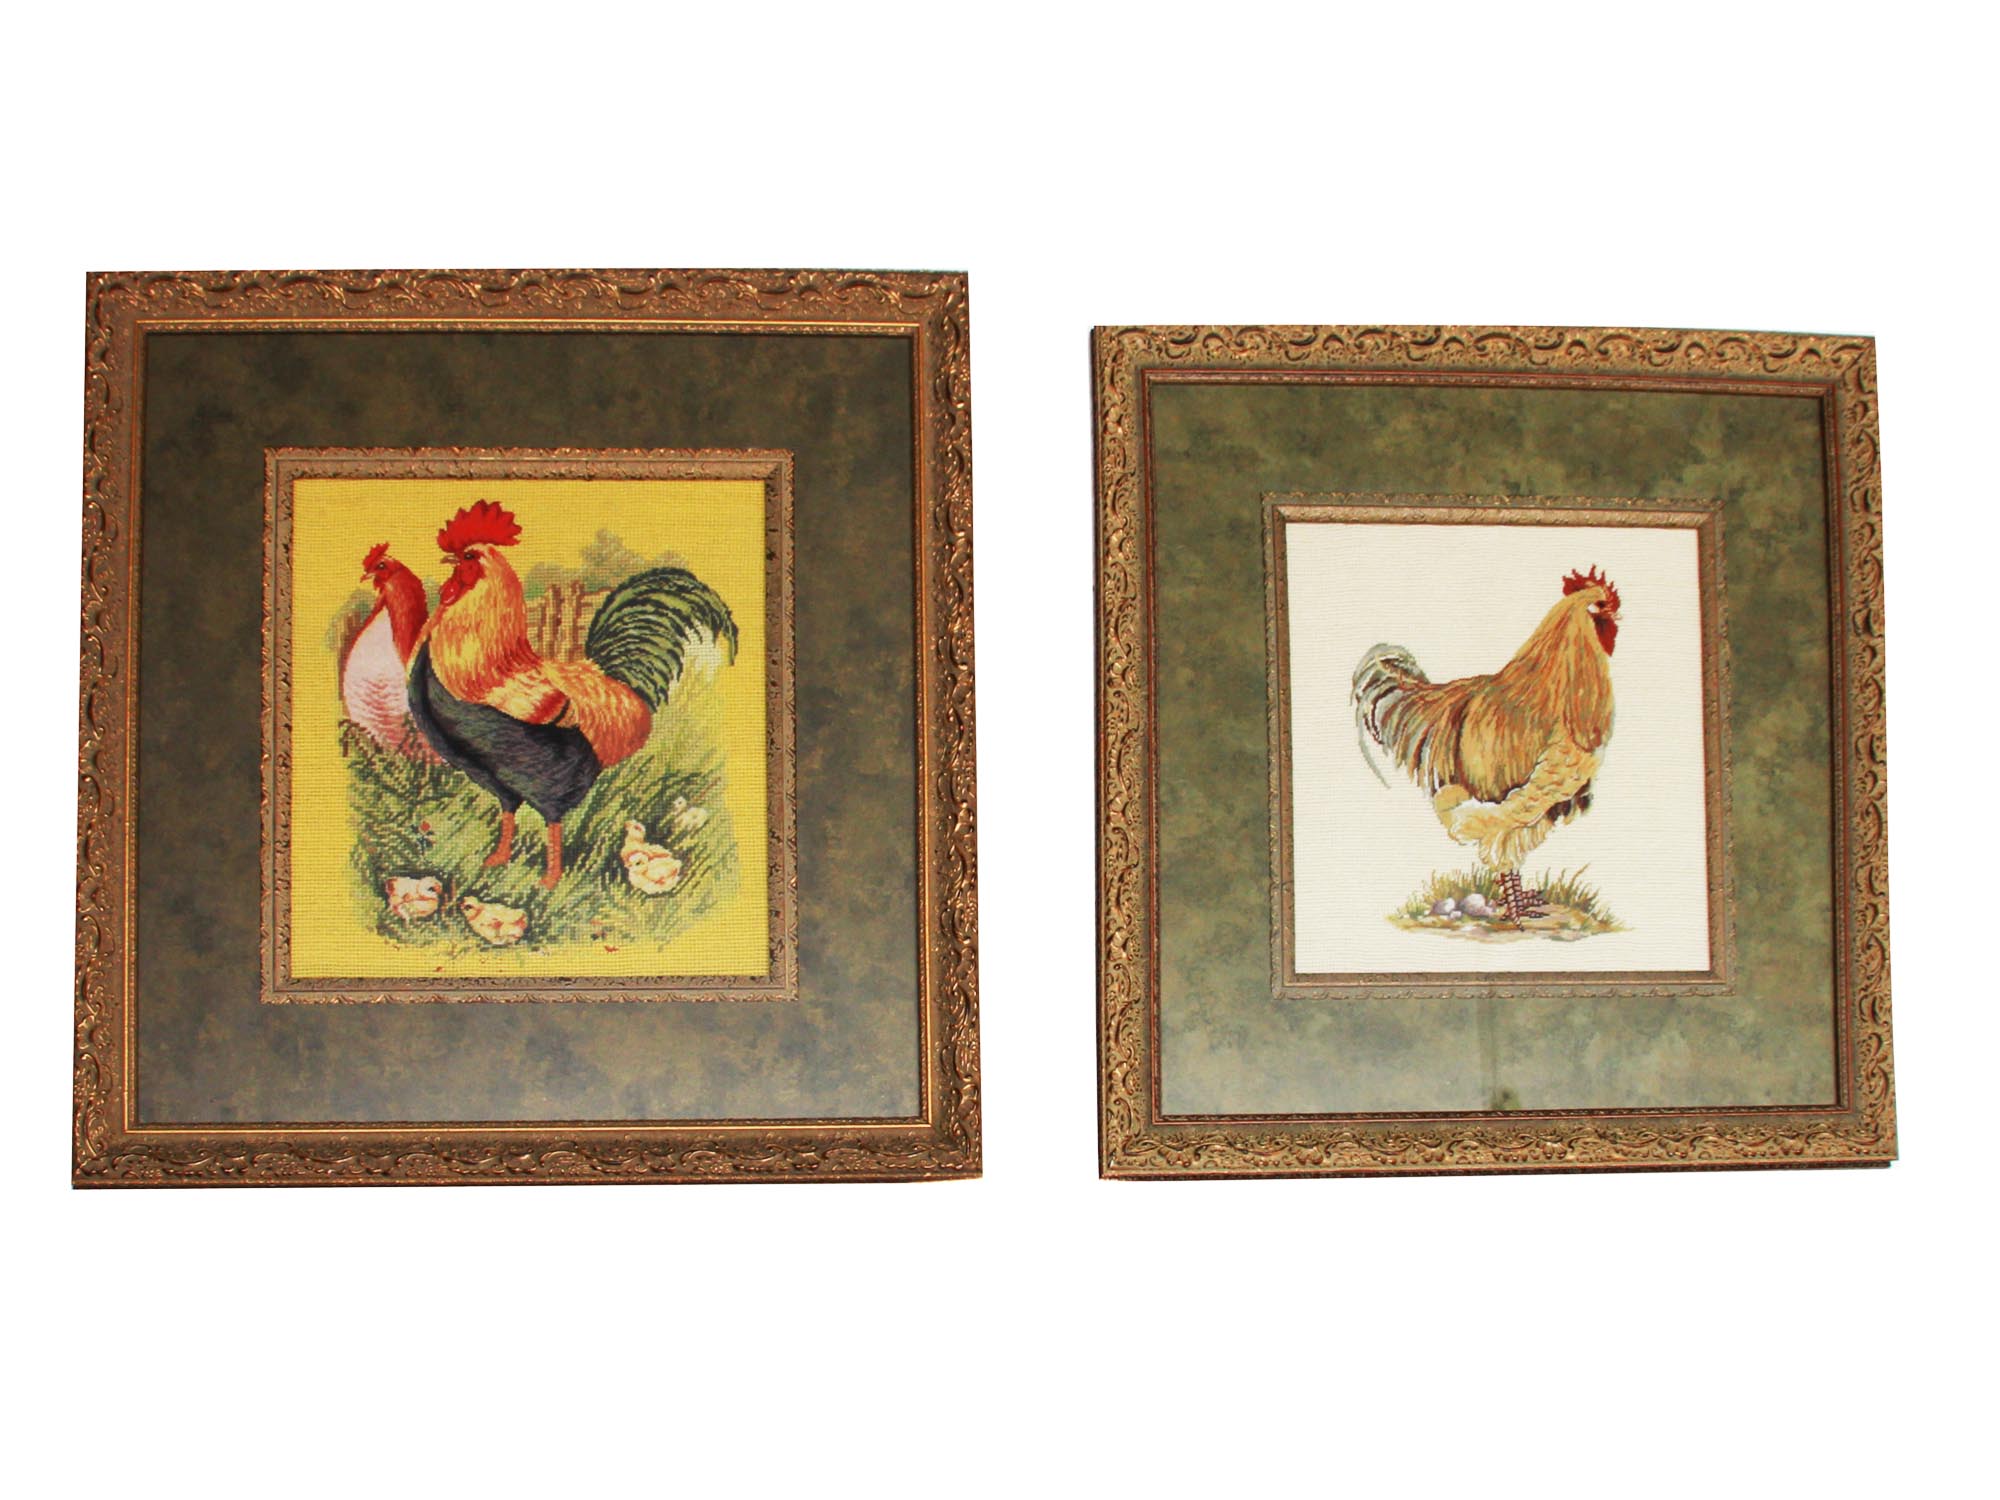 PAIR OF RUSSIAN EMBROIDERIES OF ROOSTERS FRAMED PIC-0